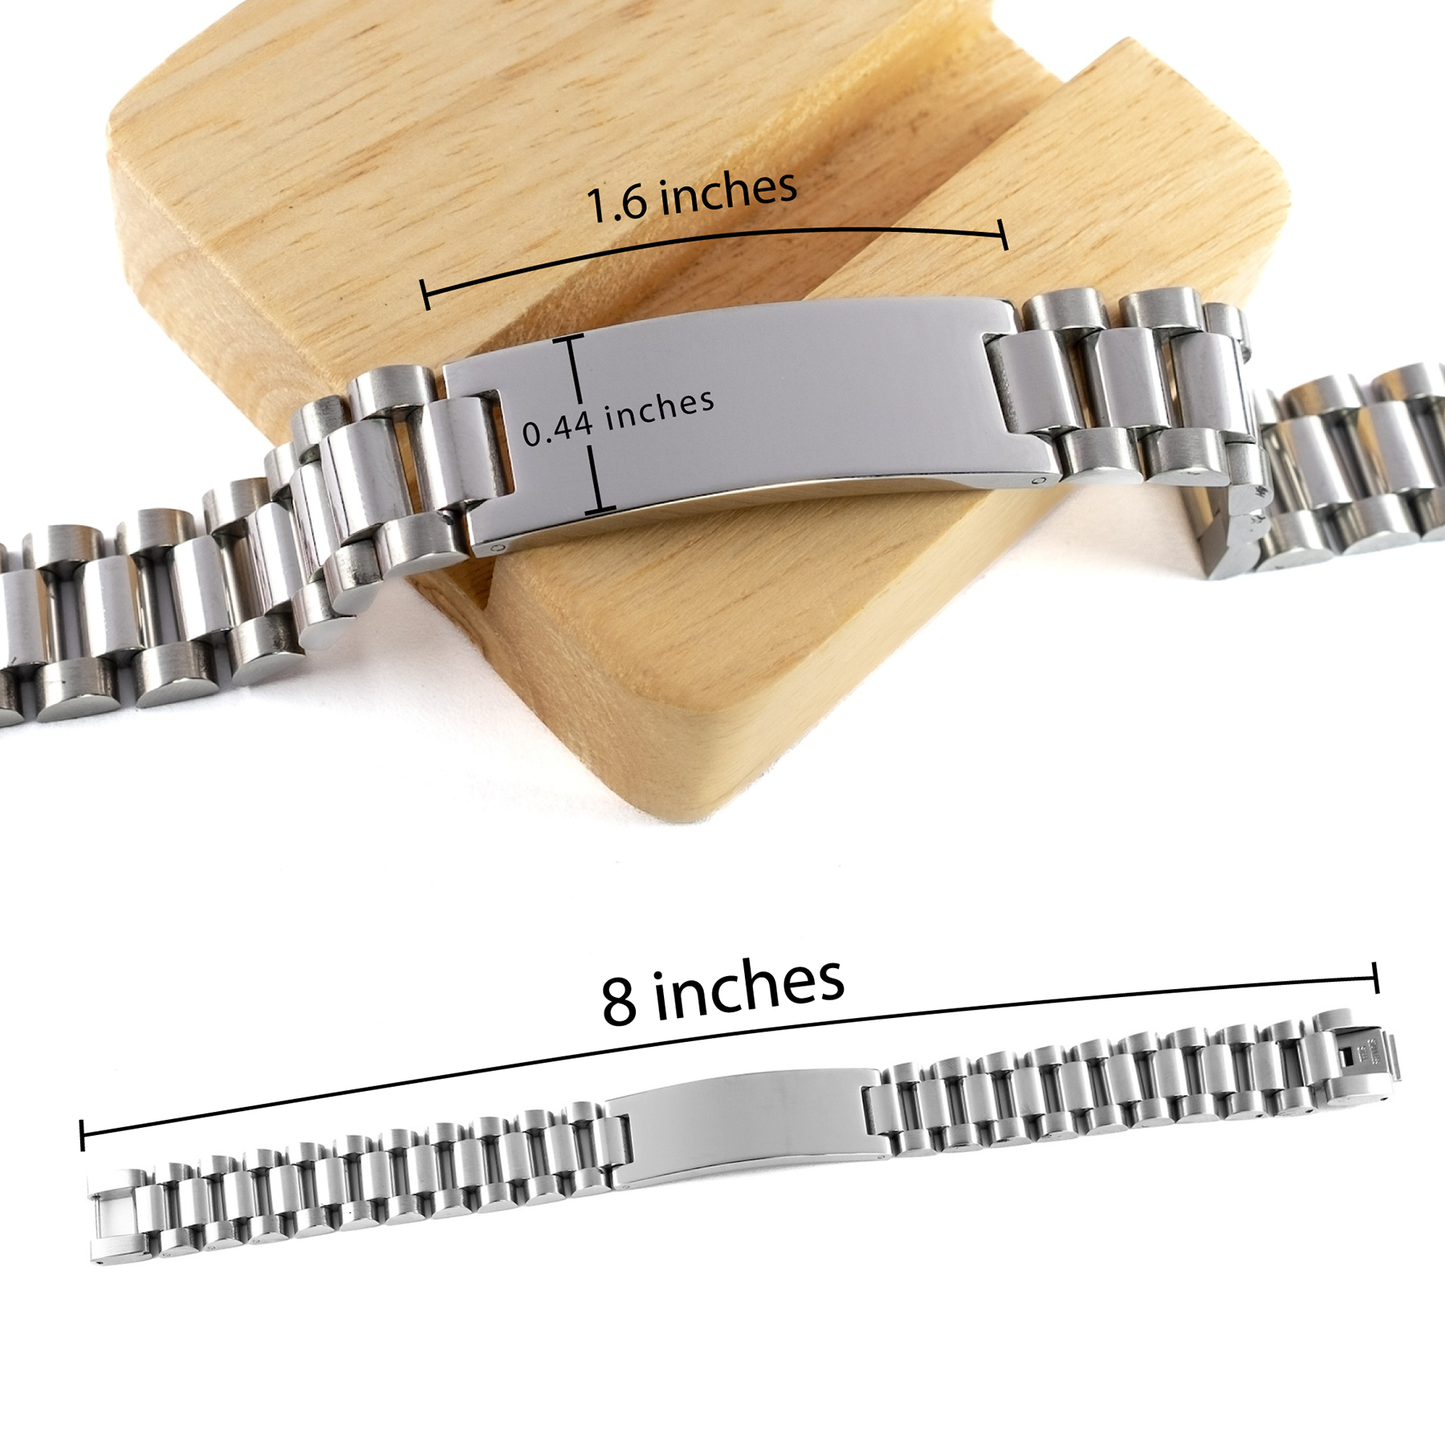 To My Aunty Thank You Gifts, You are appreciated more than you know, Appreciation Ladder Stainless Steel Bracelet for Aunty, Birthday Unique Gifts for Aunty